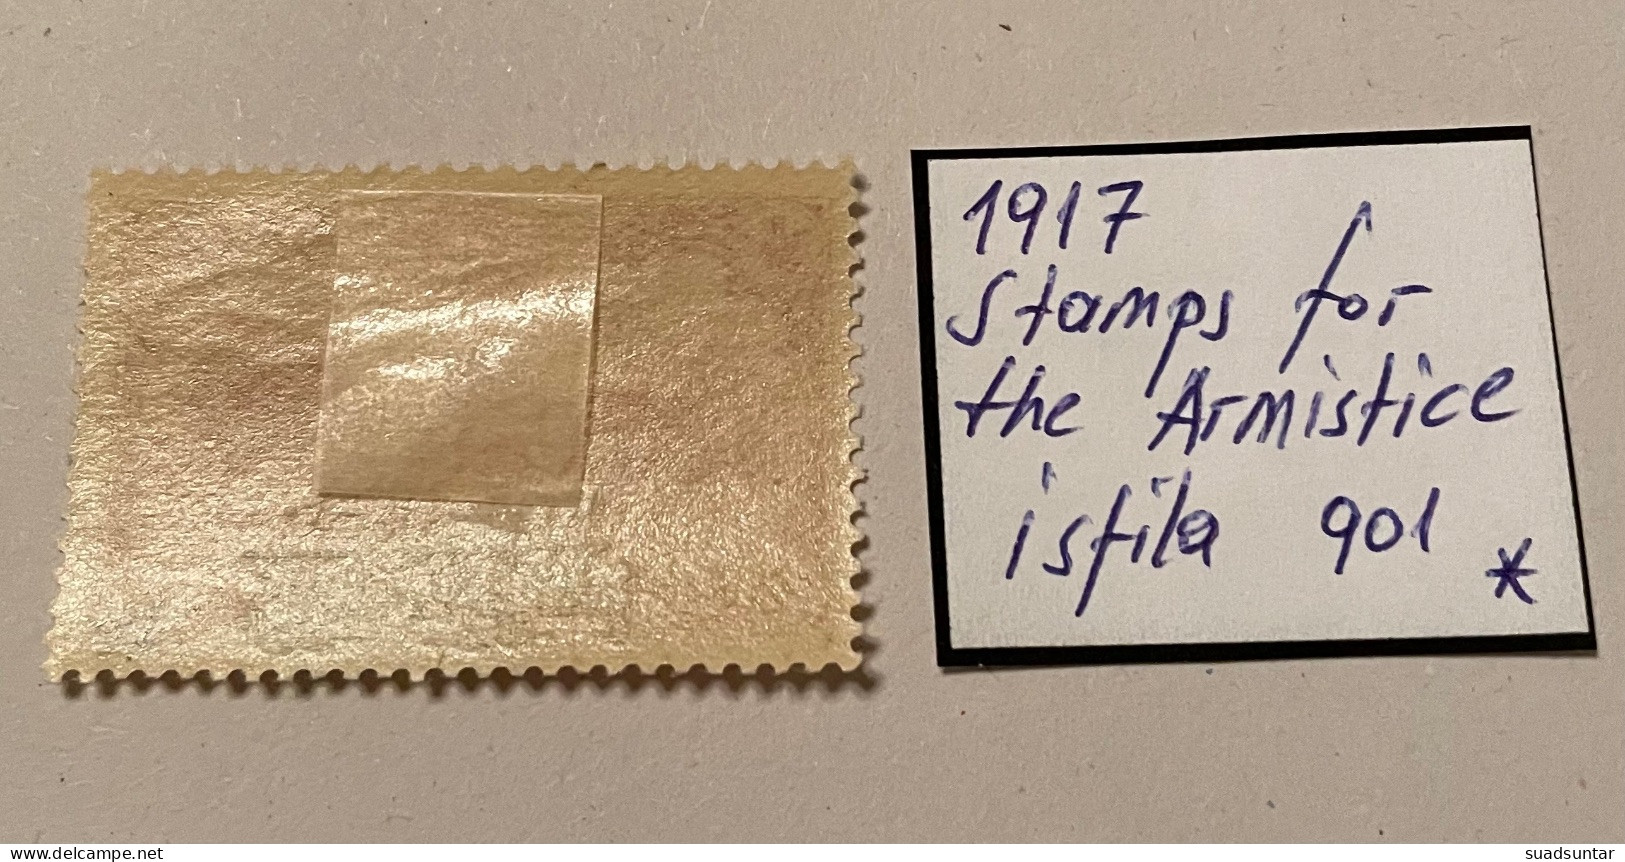 1919 Stamps For The Armistice MH Isfila 901 - Unused Stamps